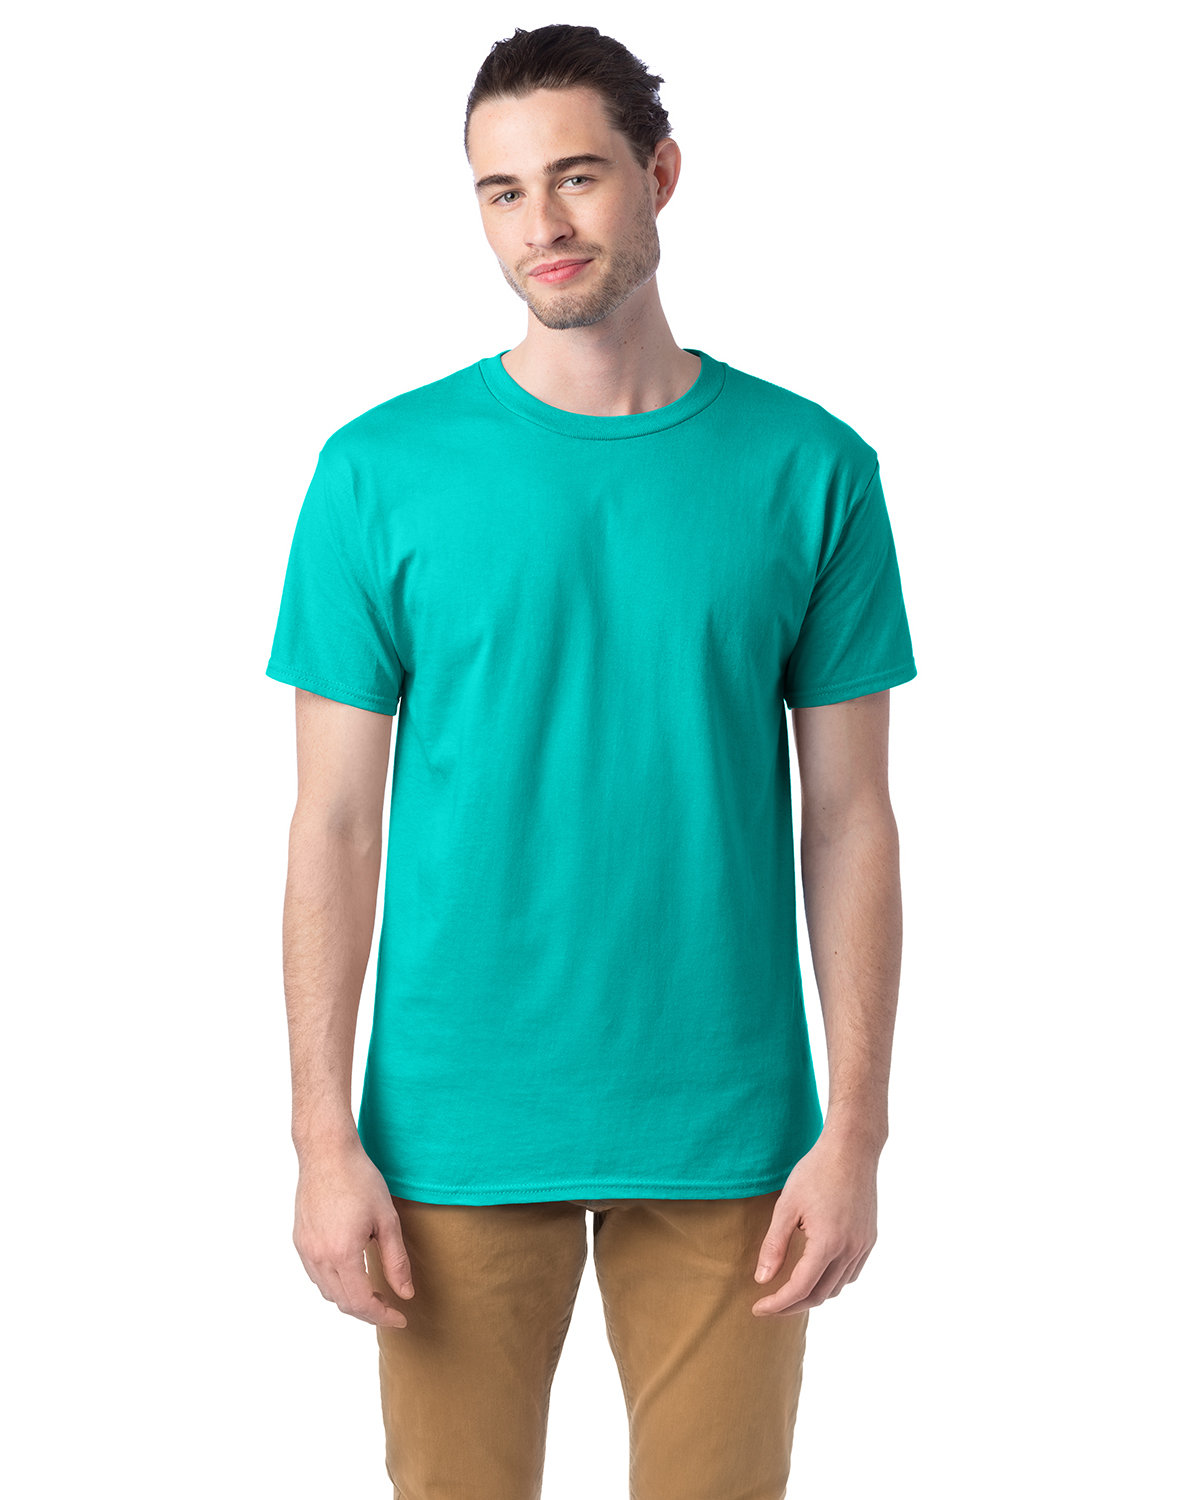 Hanes Adult Essential Short Sleeve T-Shirt athletic teal 